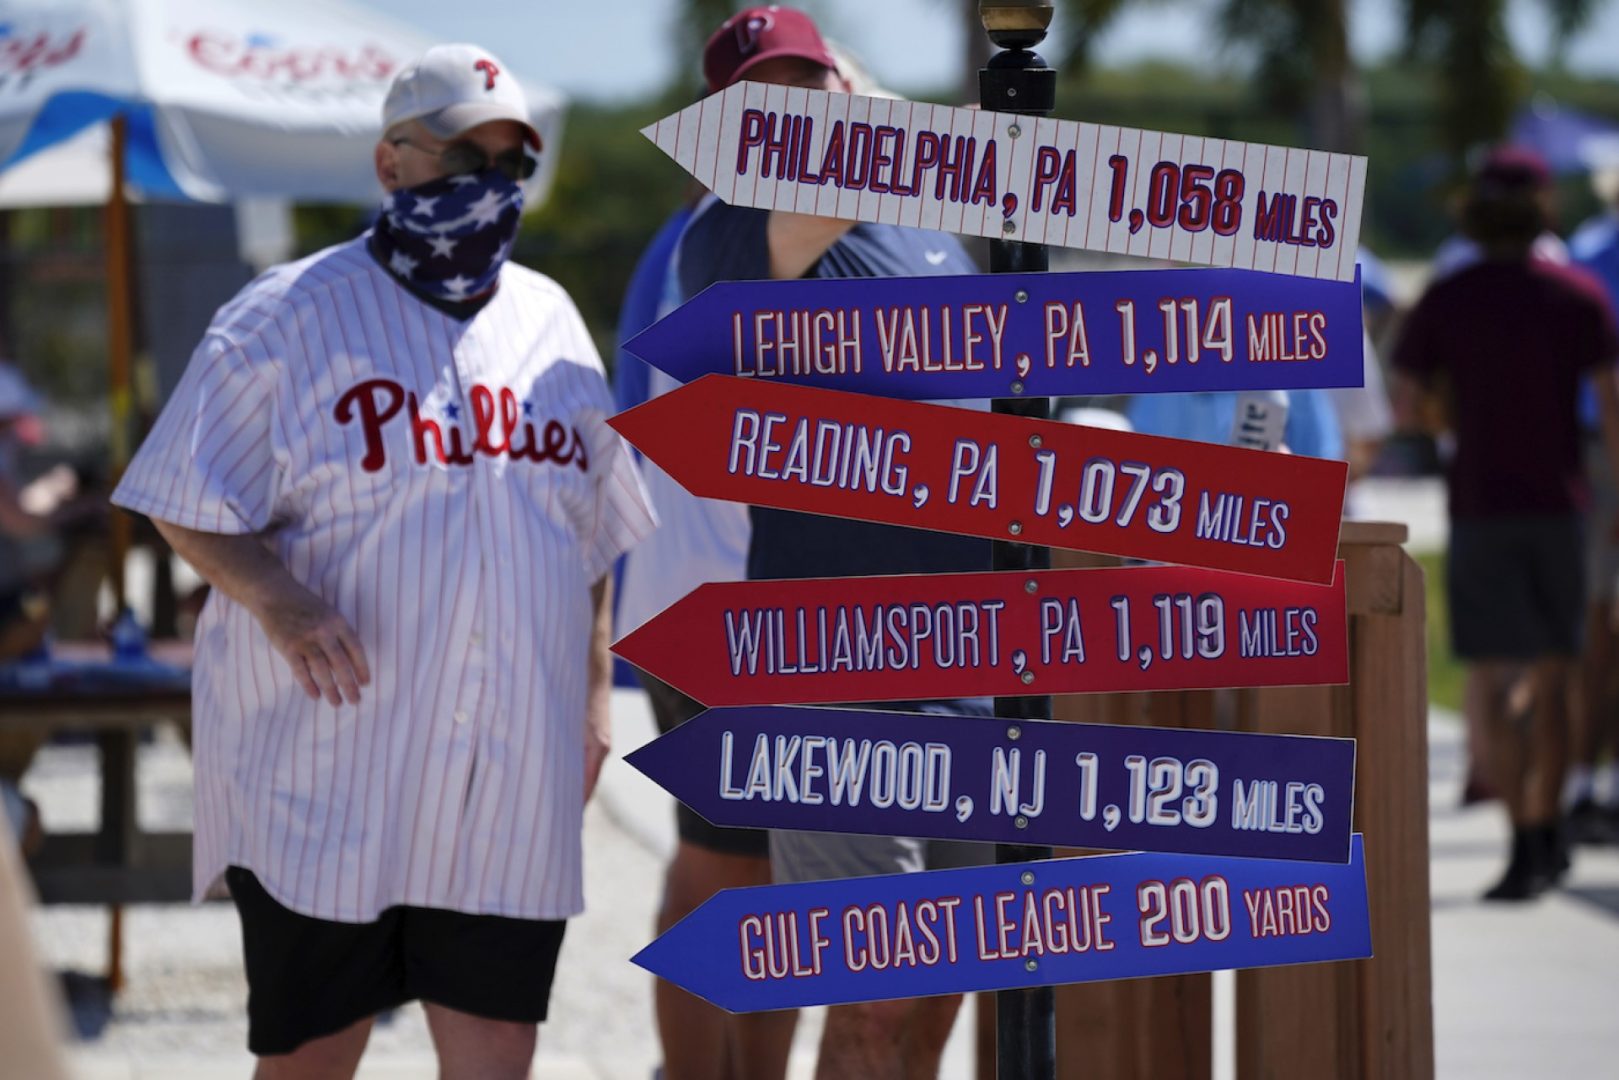 Phillies fans flock to Florida for pre-season fun in the sun - The